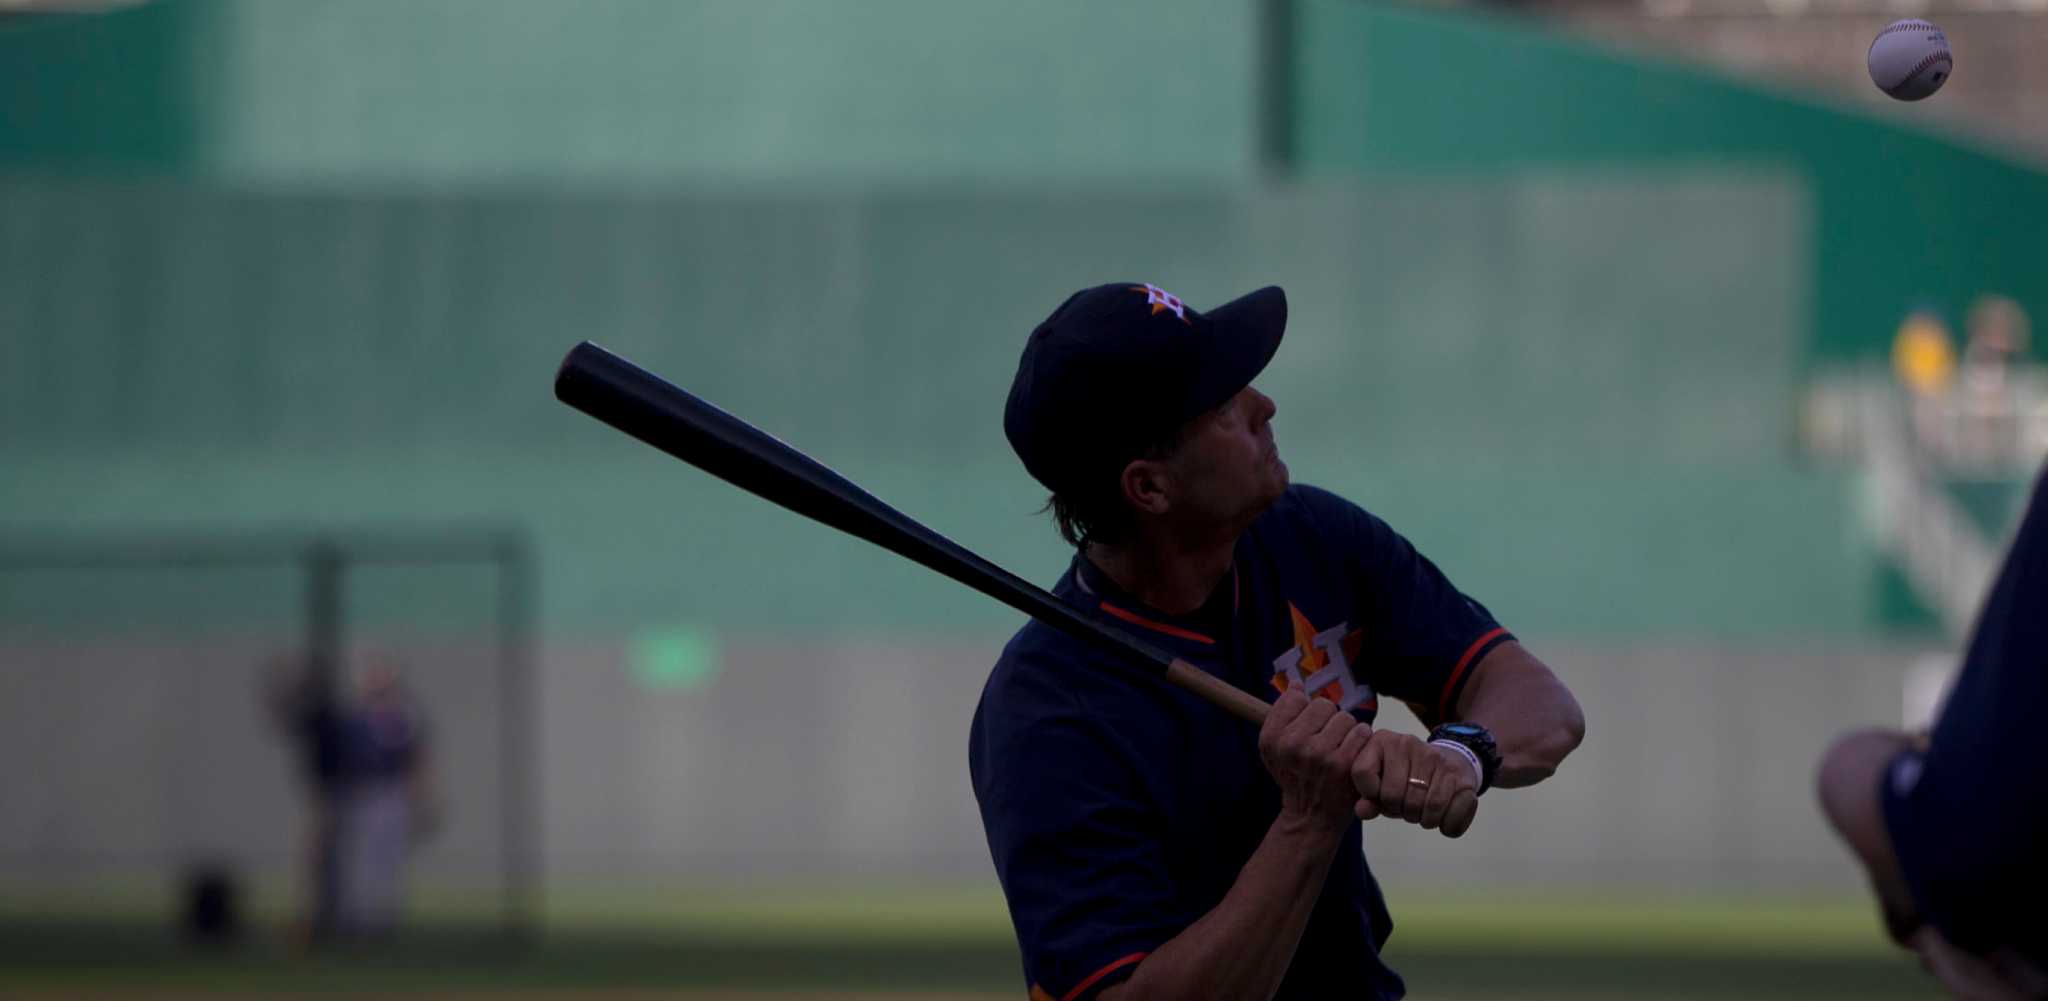 Houston Astros Jeff Bagwell: The trade that changed a franchise forever